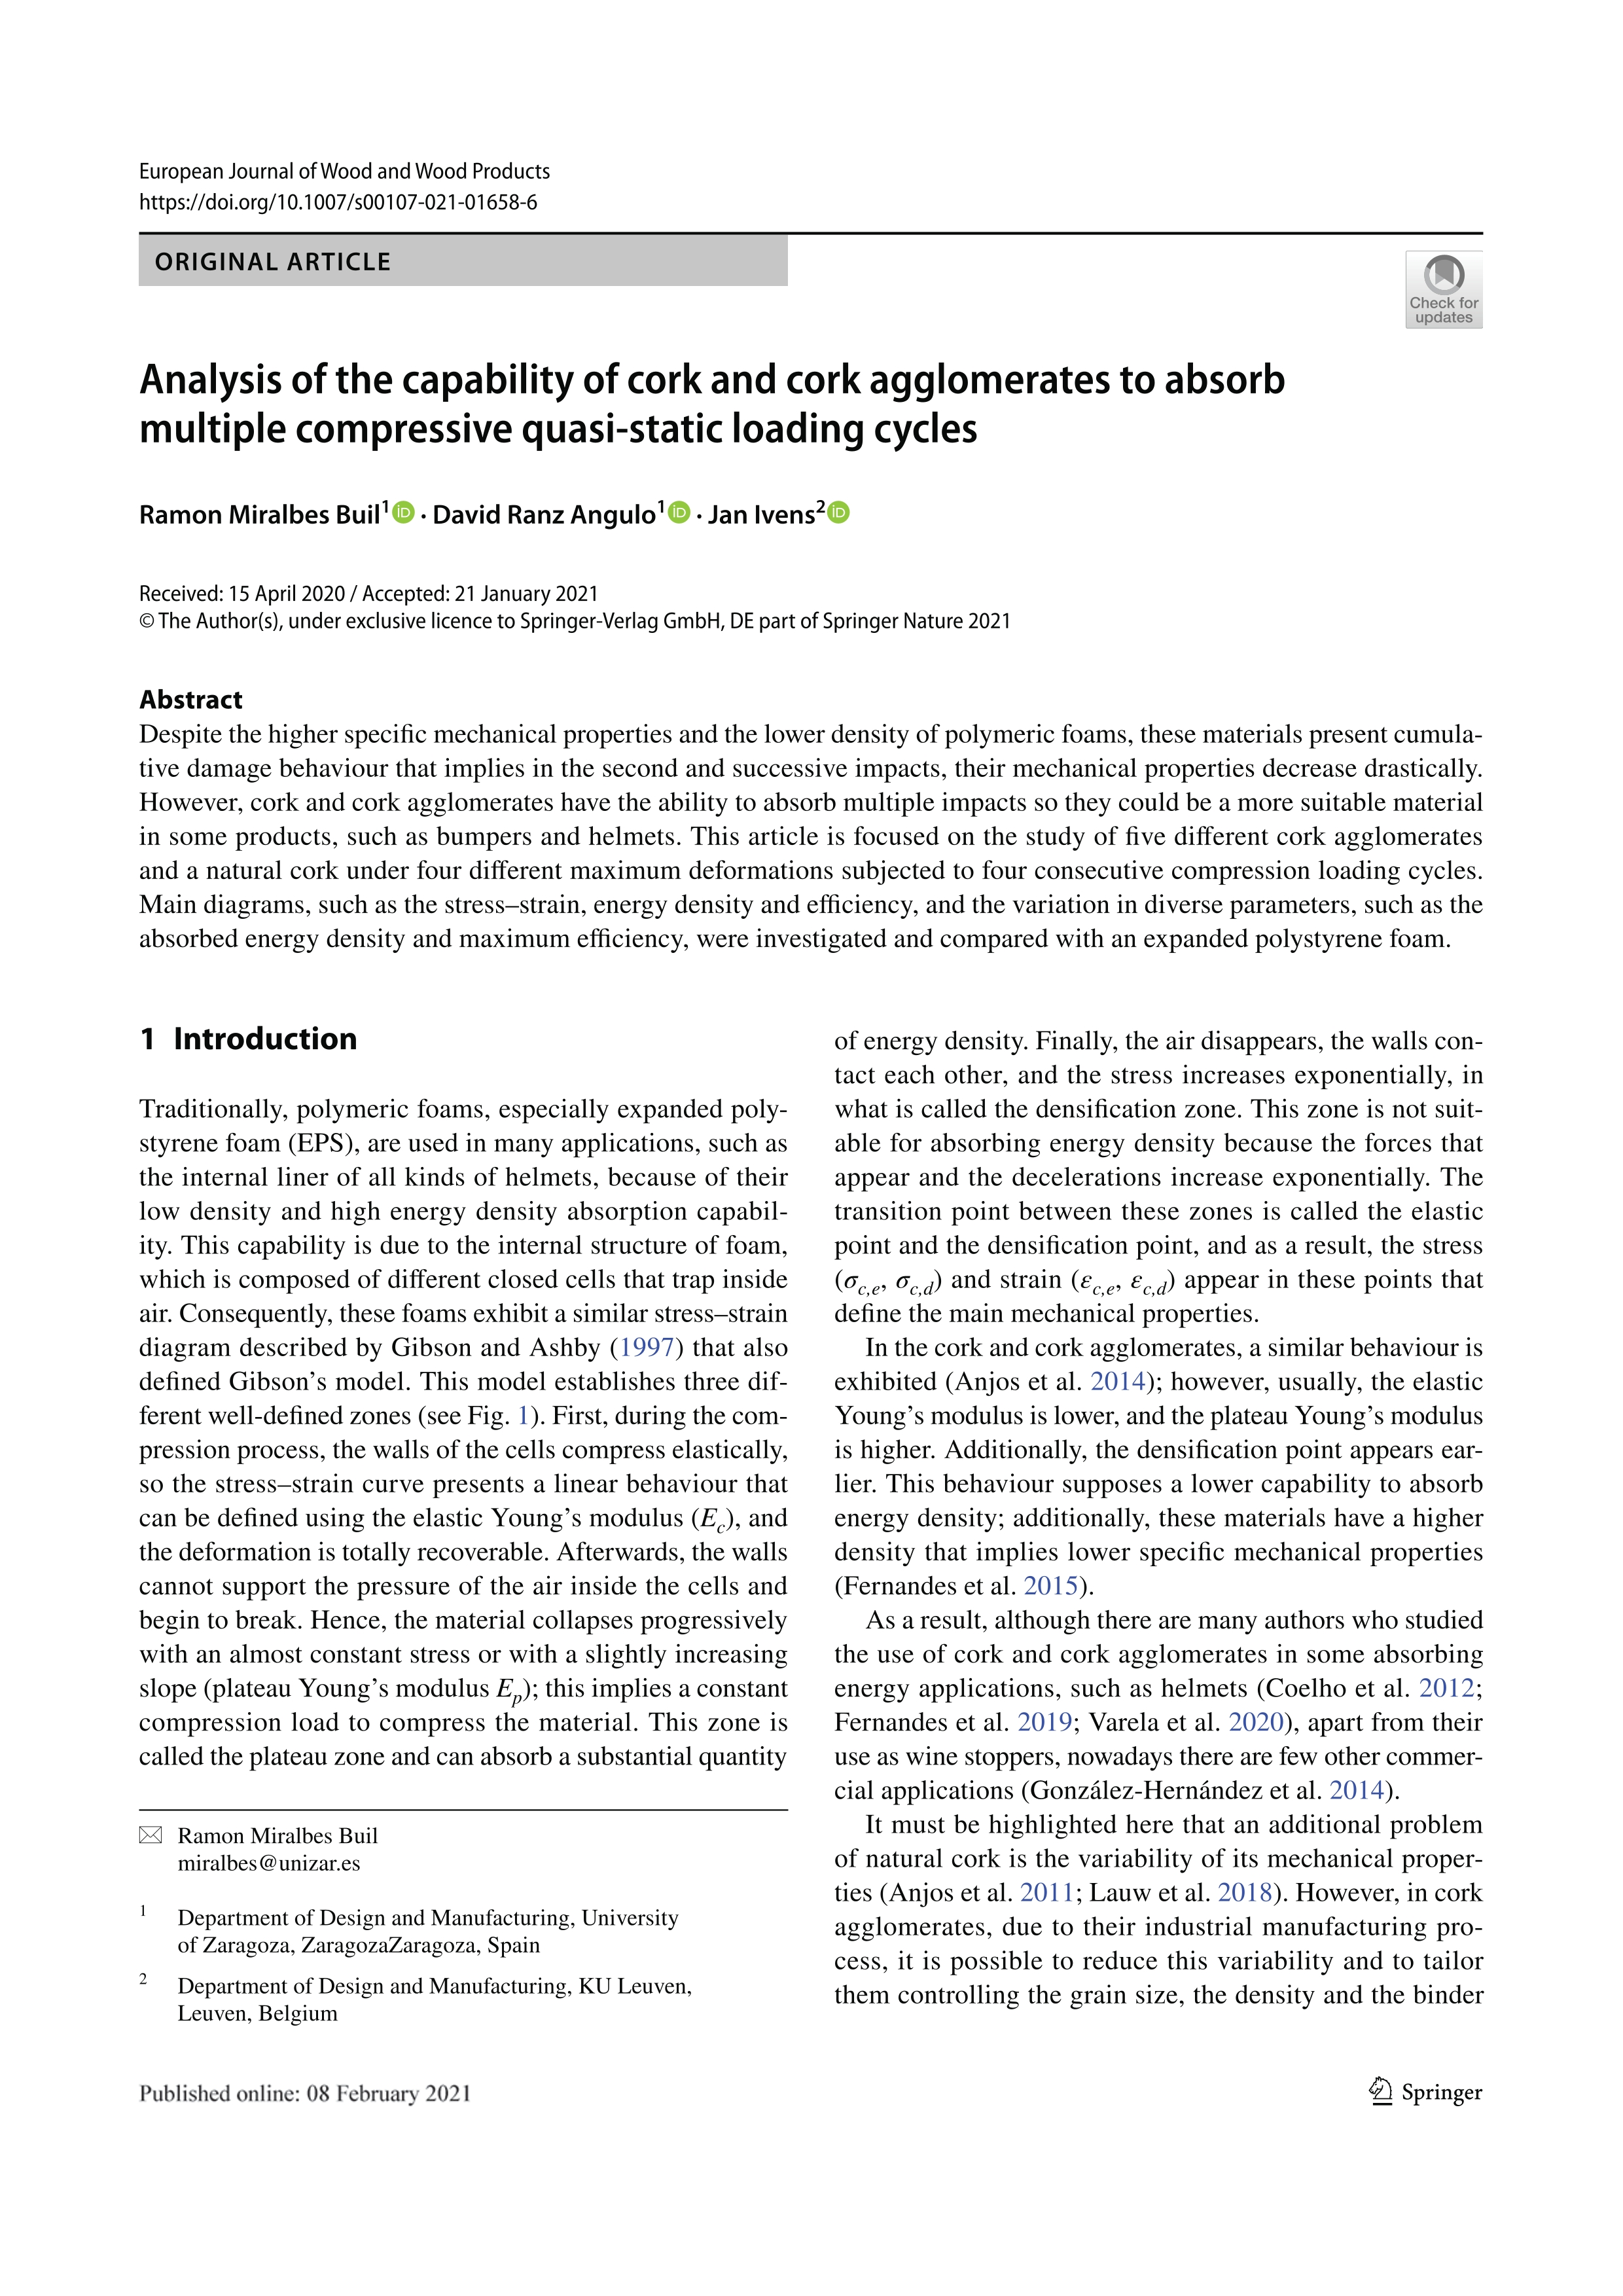 Analysis of the capability of cork and cork agglomerates to absorb multiple compressive quasi-static loading cycles